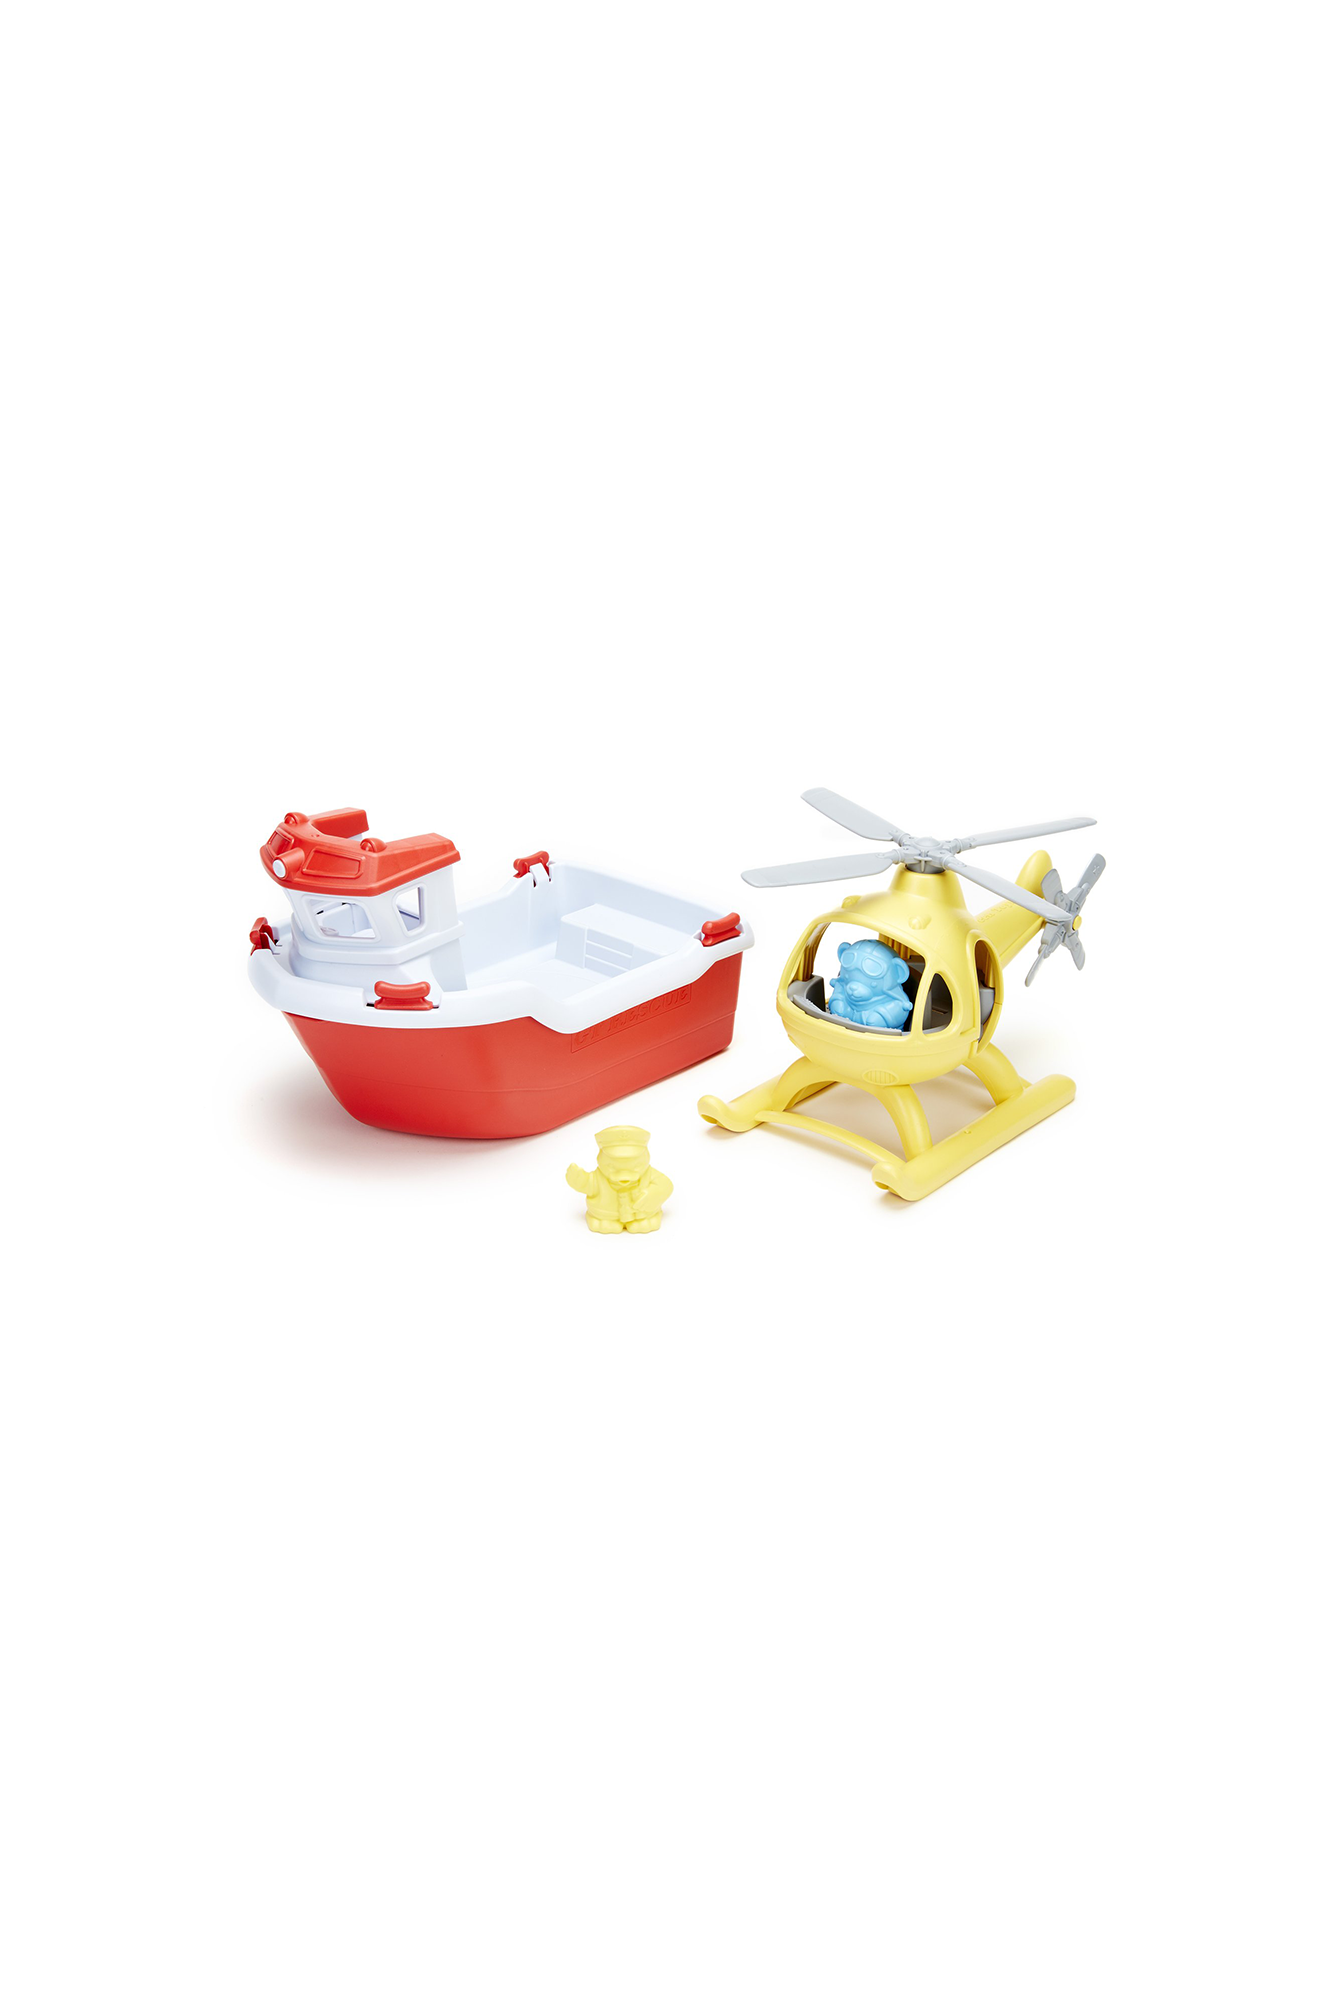 GREEN TOYS RESCUE BOAT &amp; HELICOPTER - Sea Apple